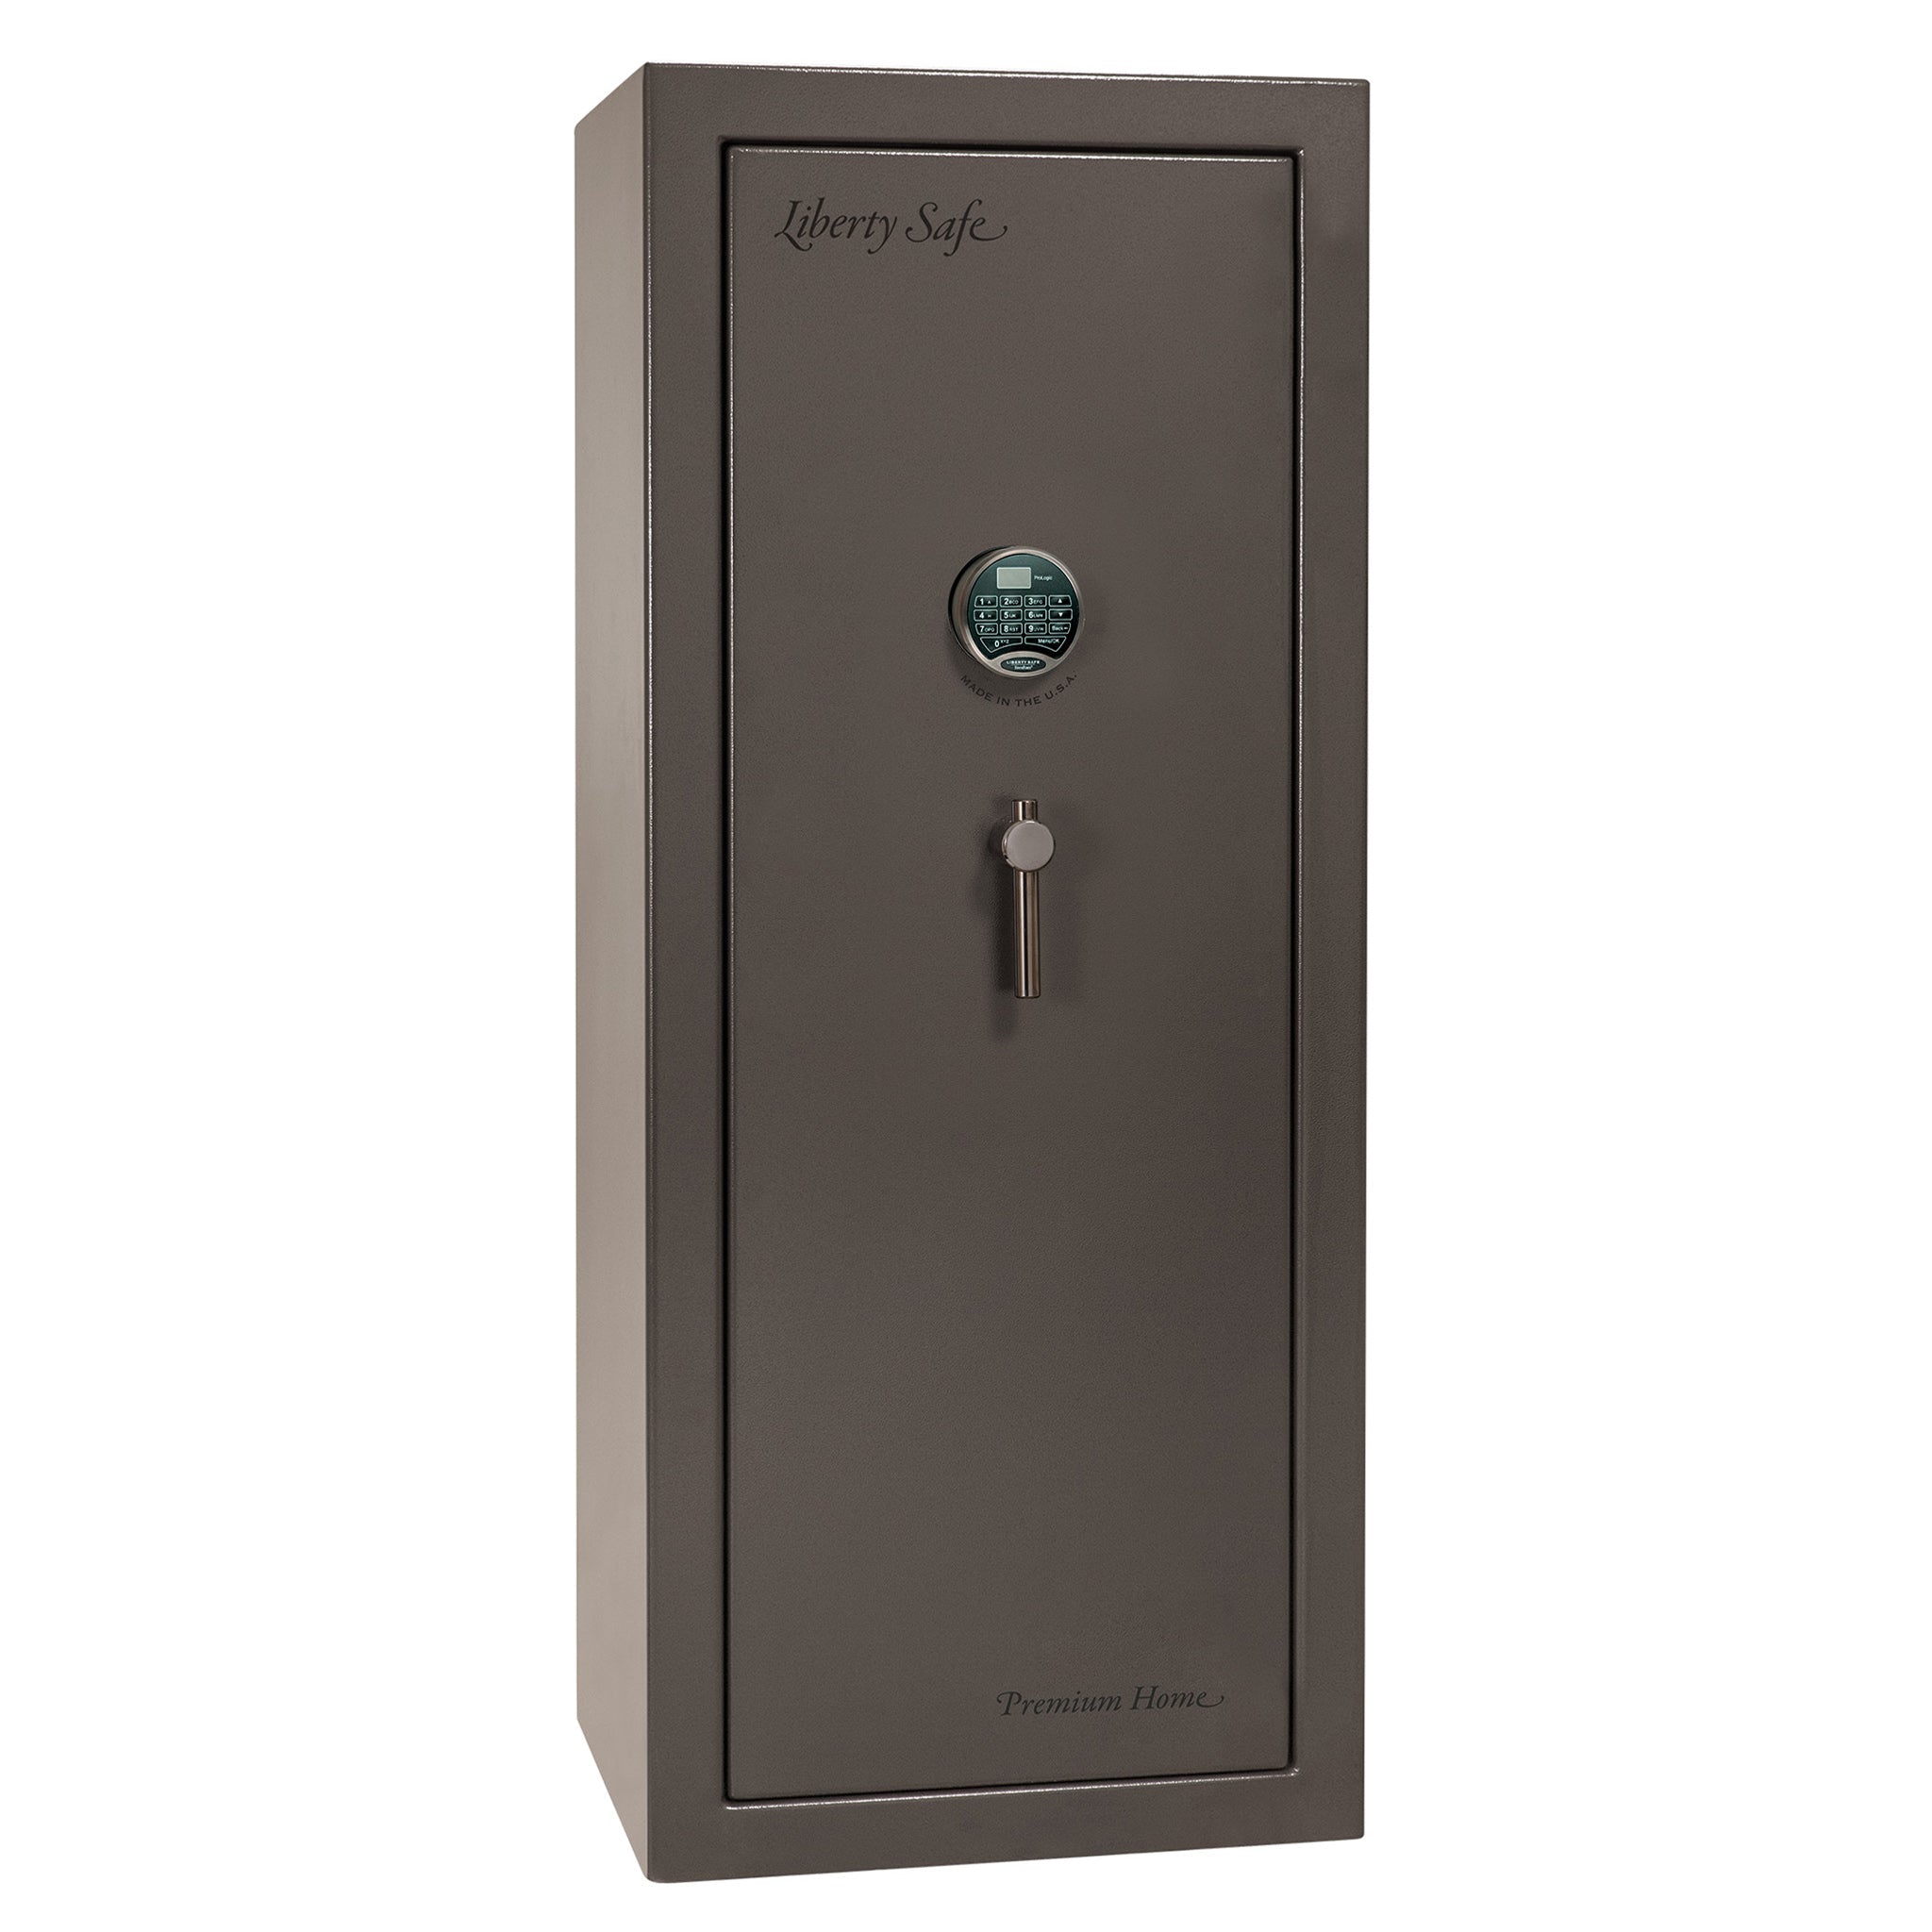 Premium Home Series | Level 7 Security | 2 Hour Fire Protection | 17 | Dimensions: 60.25"(H) x 24.5"(W) x 19"(D) | Gray Marble - Closed Door